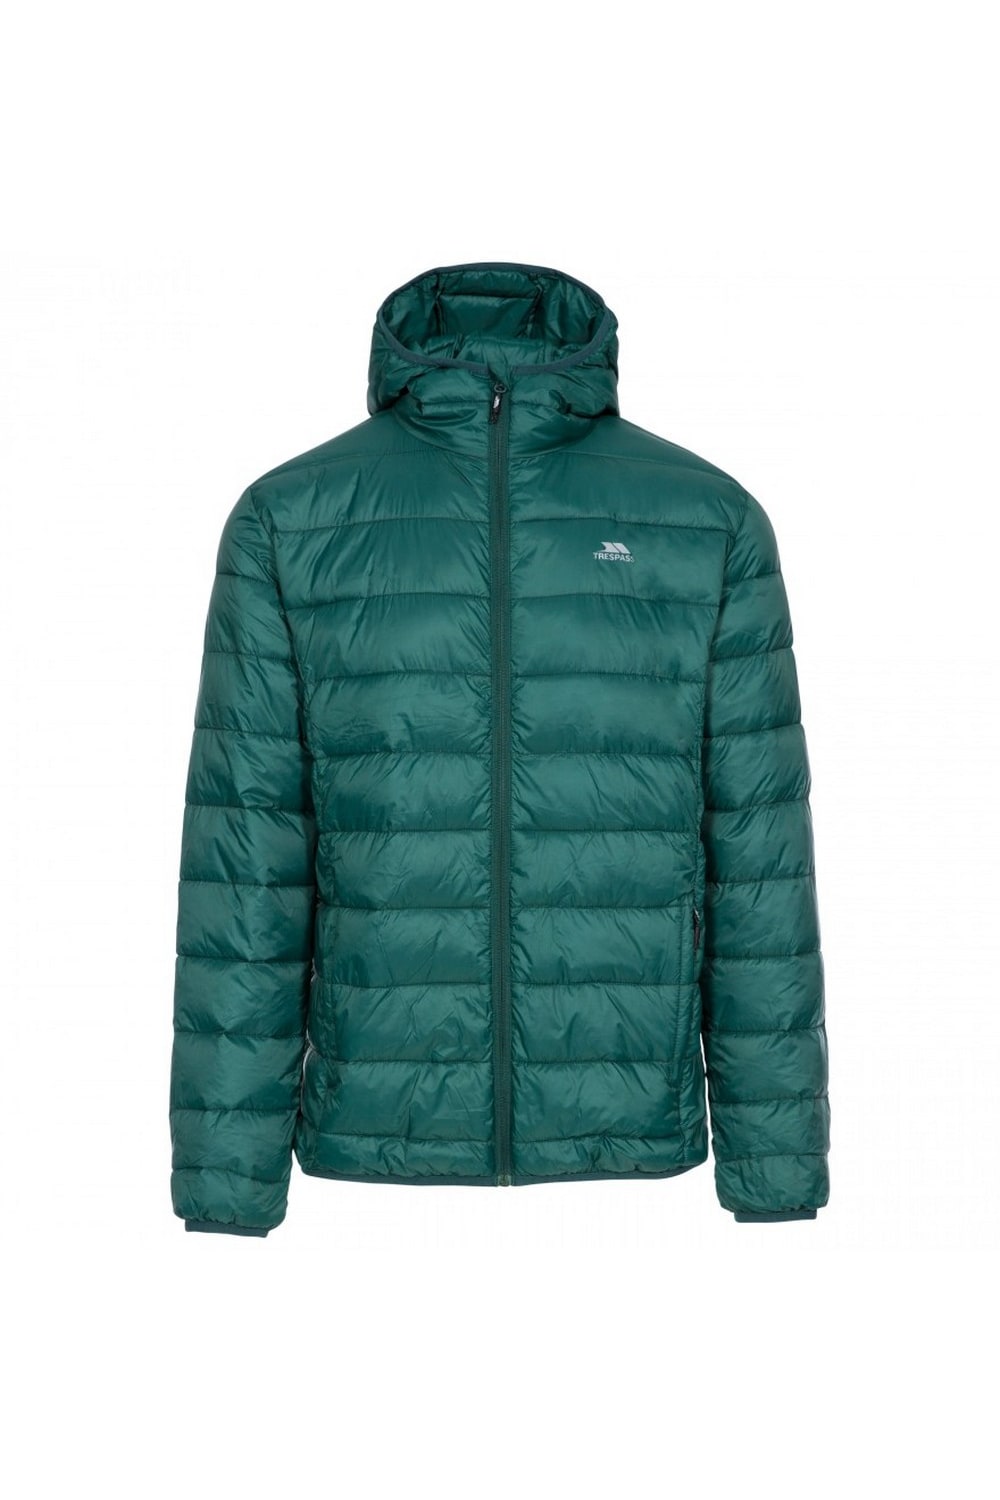 Trespass Mens Carruthers Padded Jacket (Forest Green)